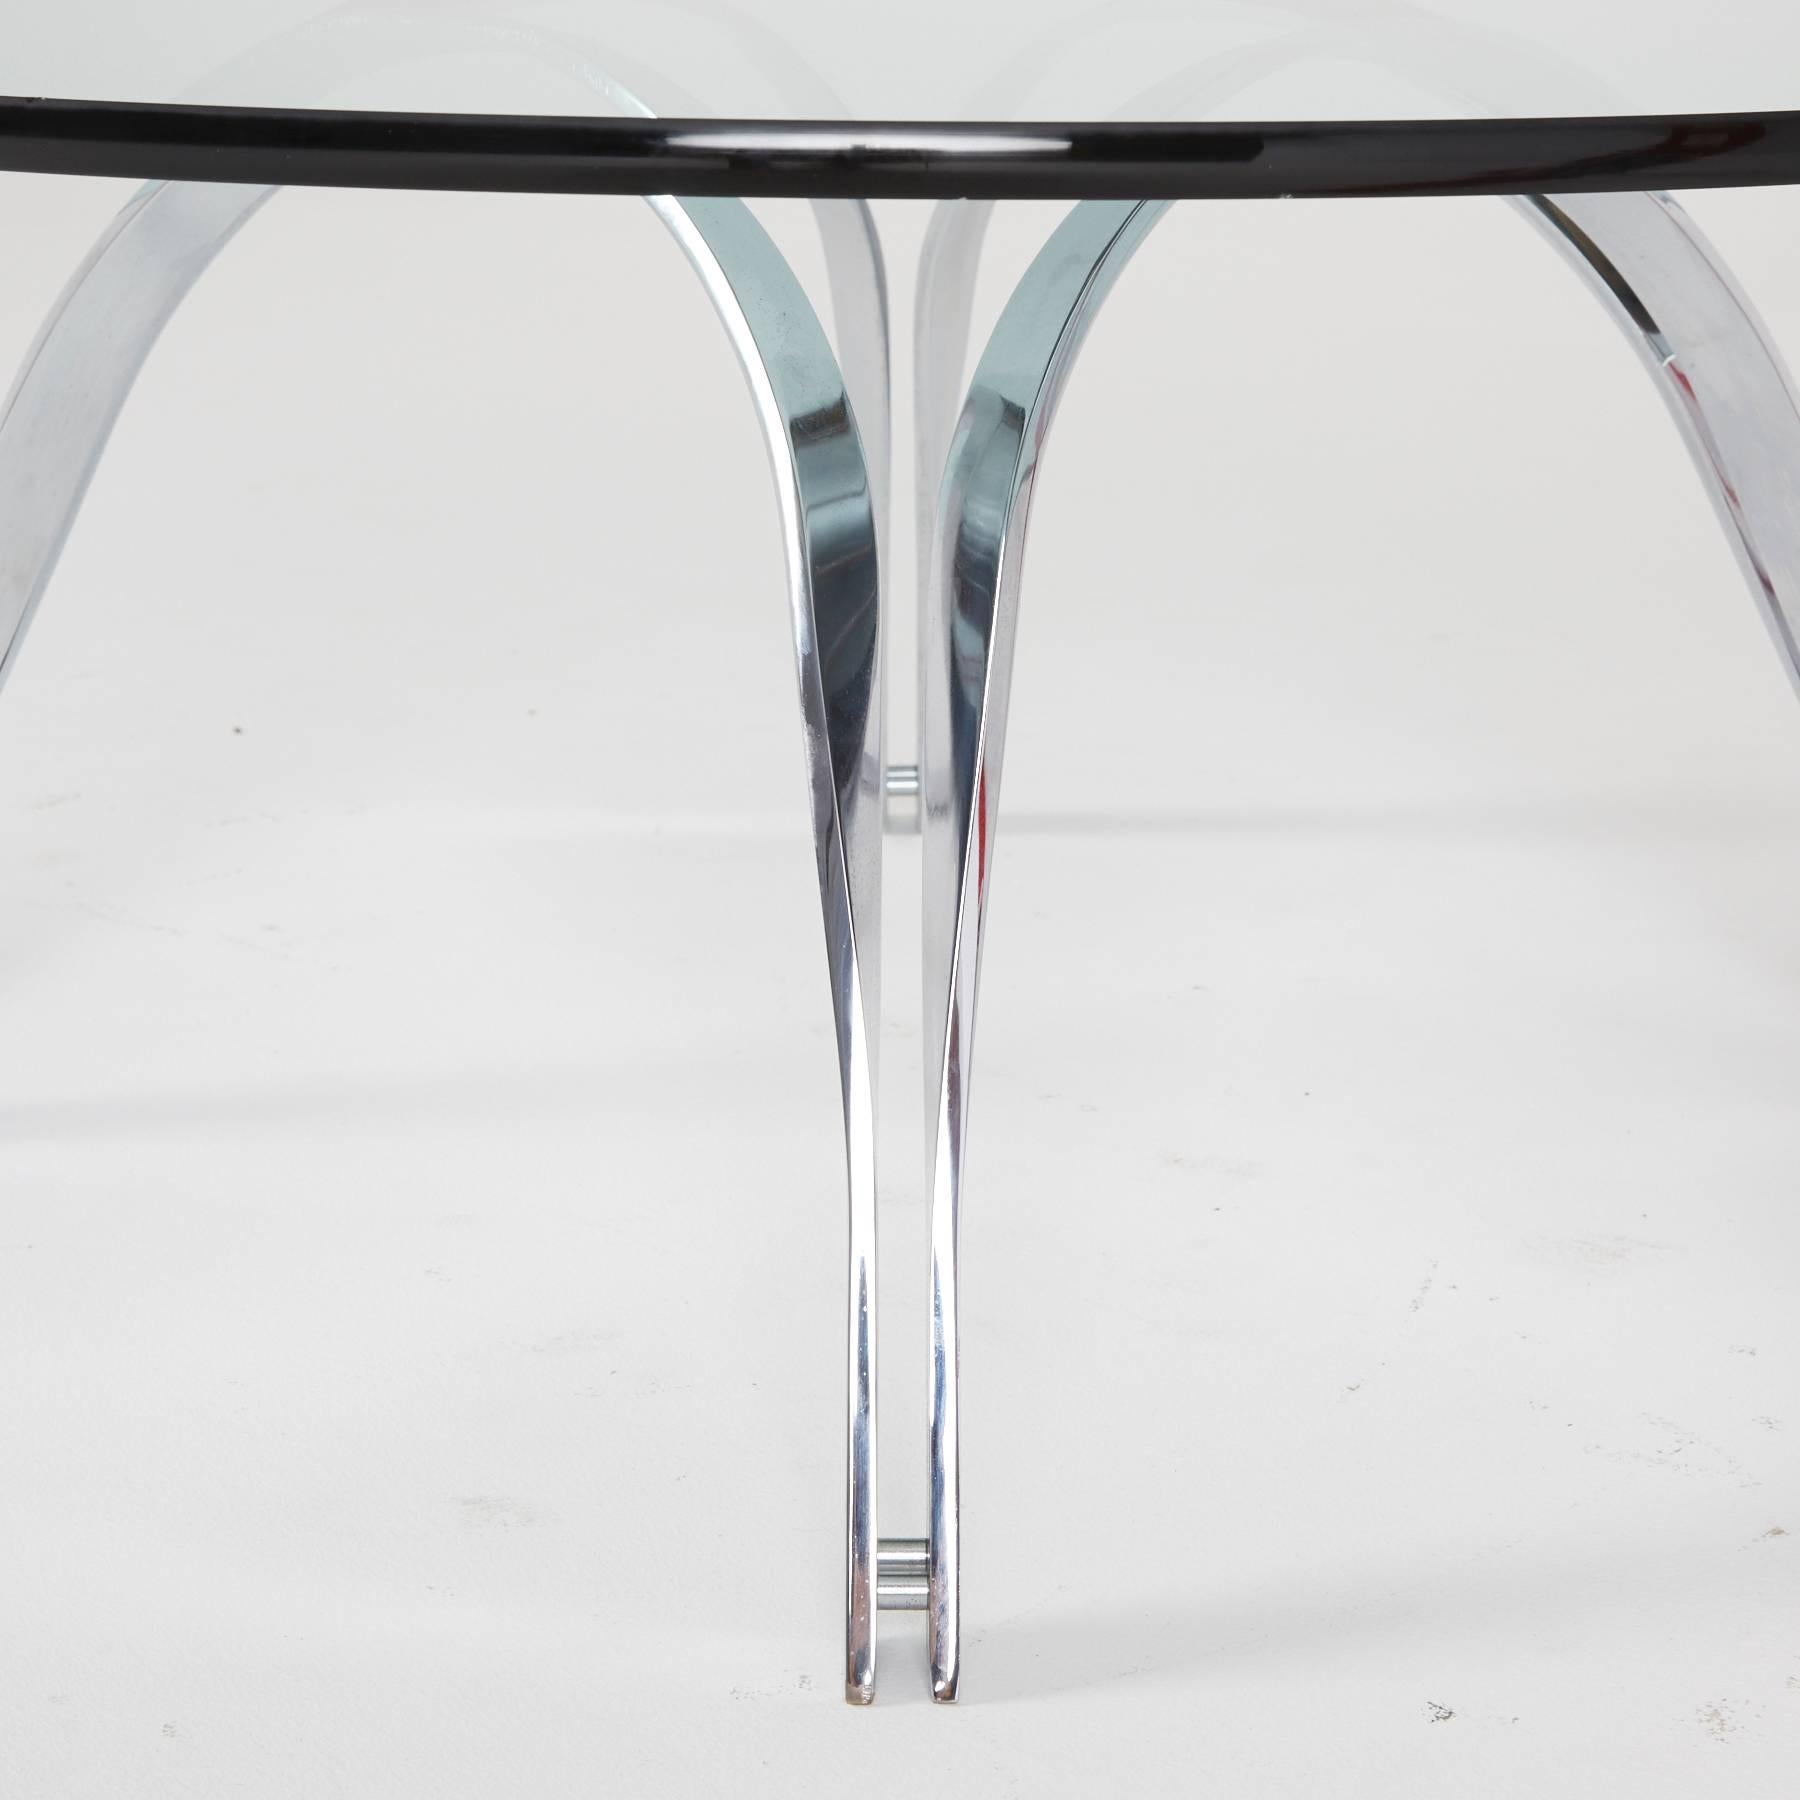 Late 20th Century 1970s Sculptural Chrome Roger Sprunger Style Coffee Table by Tri-Mark